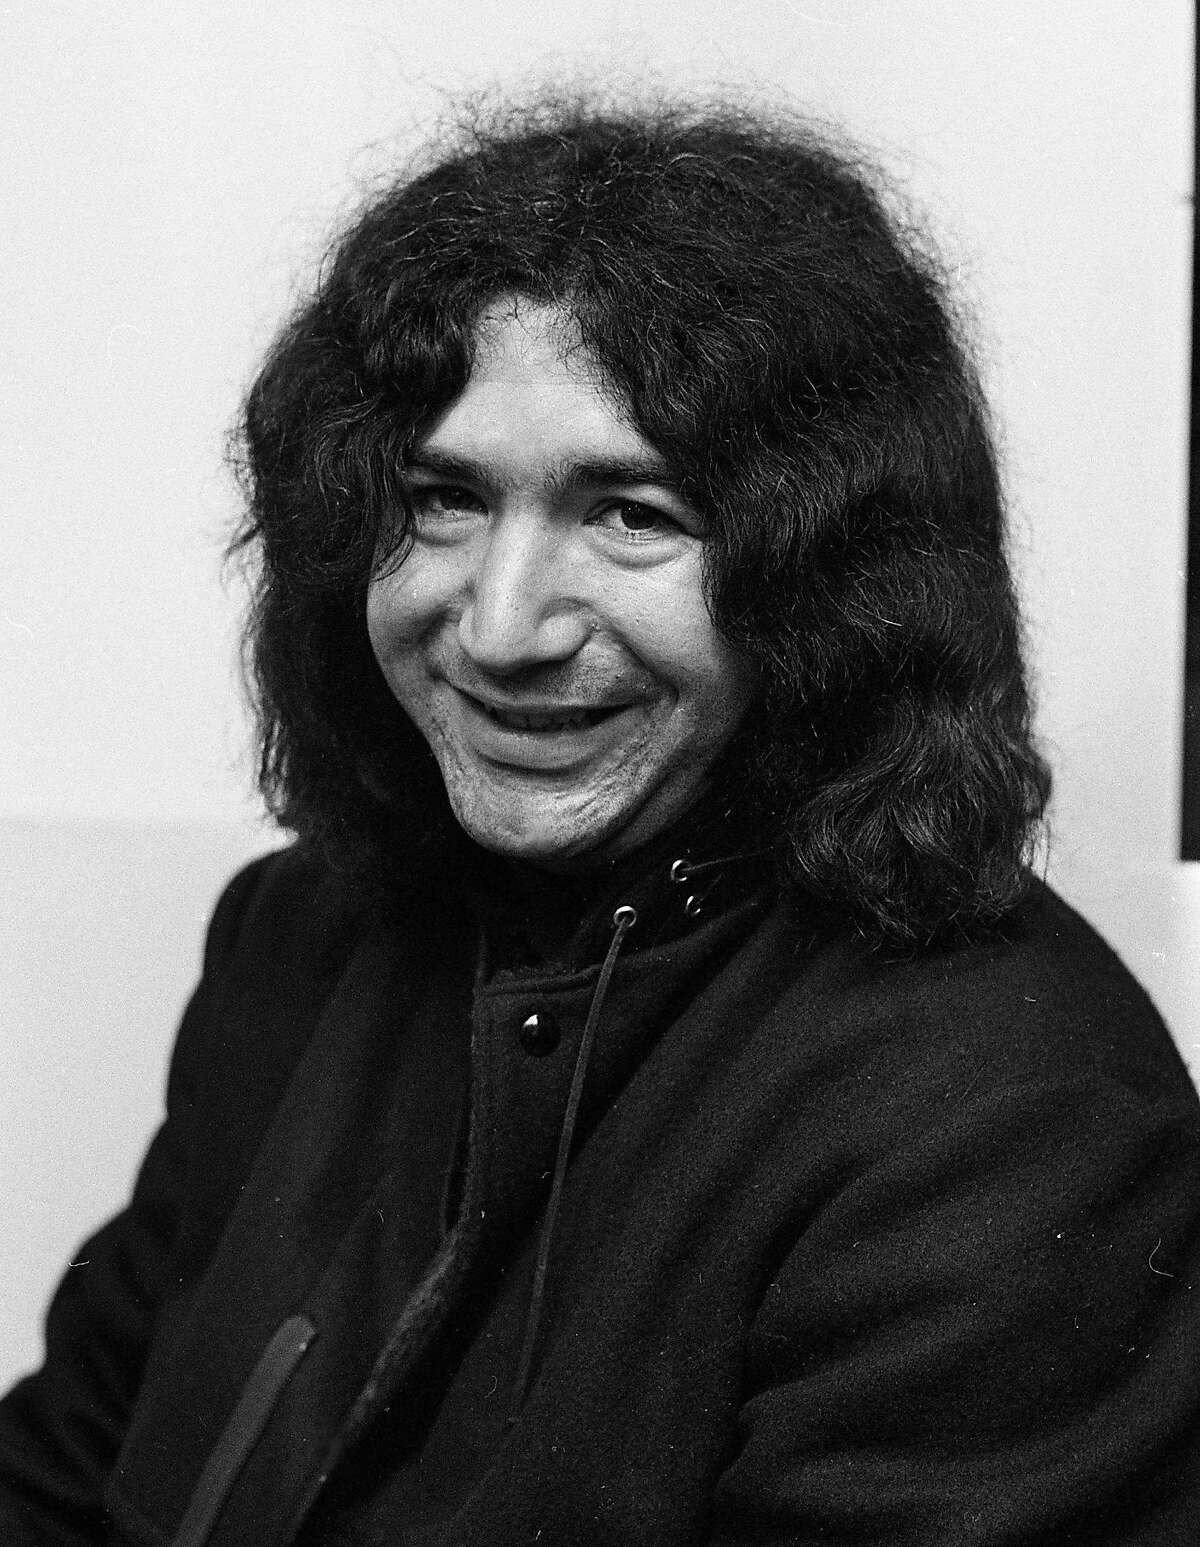 Jerry Garcia of the Grateful Dead poses for a portrait, November 29, 1966